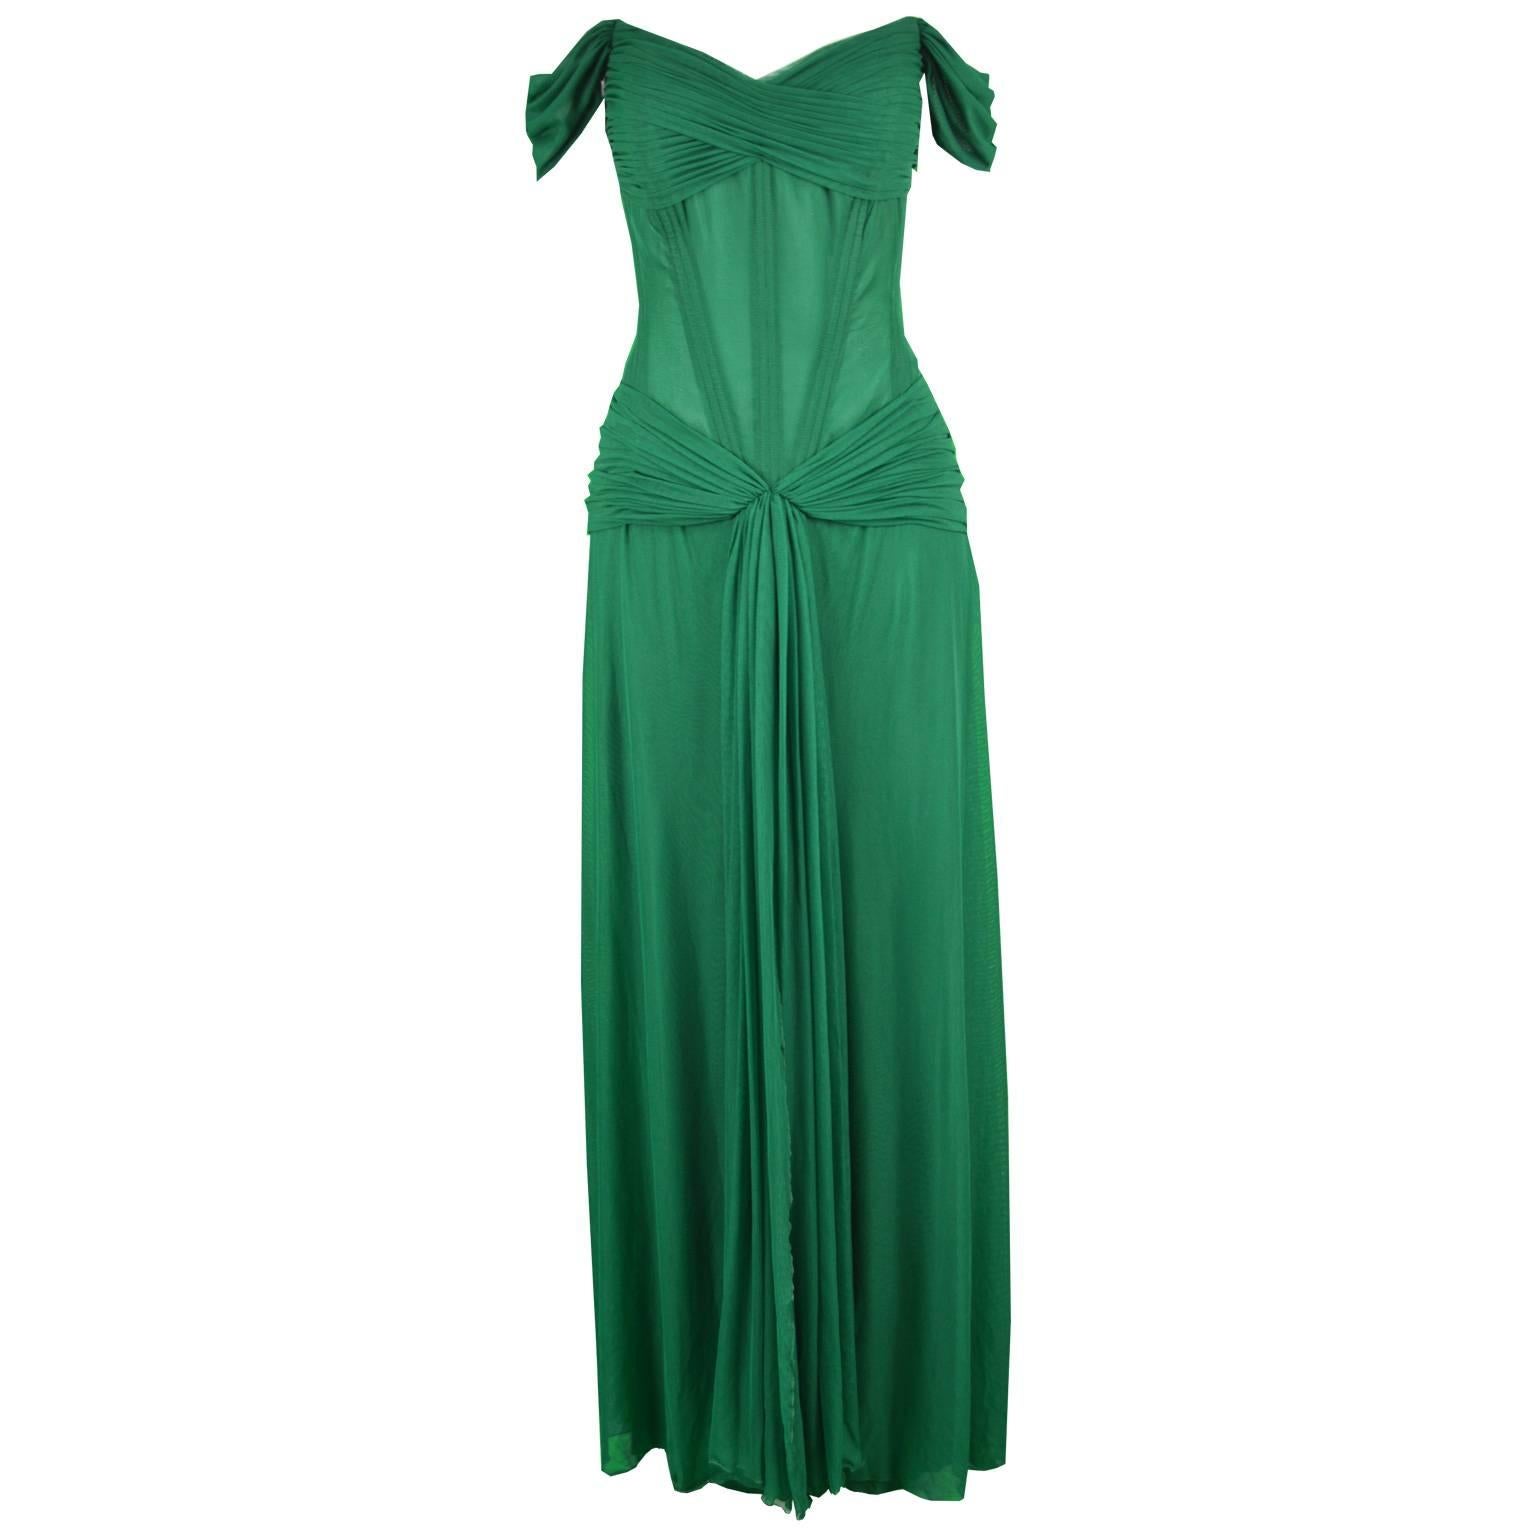 Vicky Tiel Couture 24-Boned Green Jersey Off the Shoulder Evening Gown, 1990s